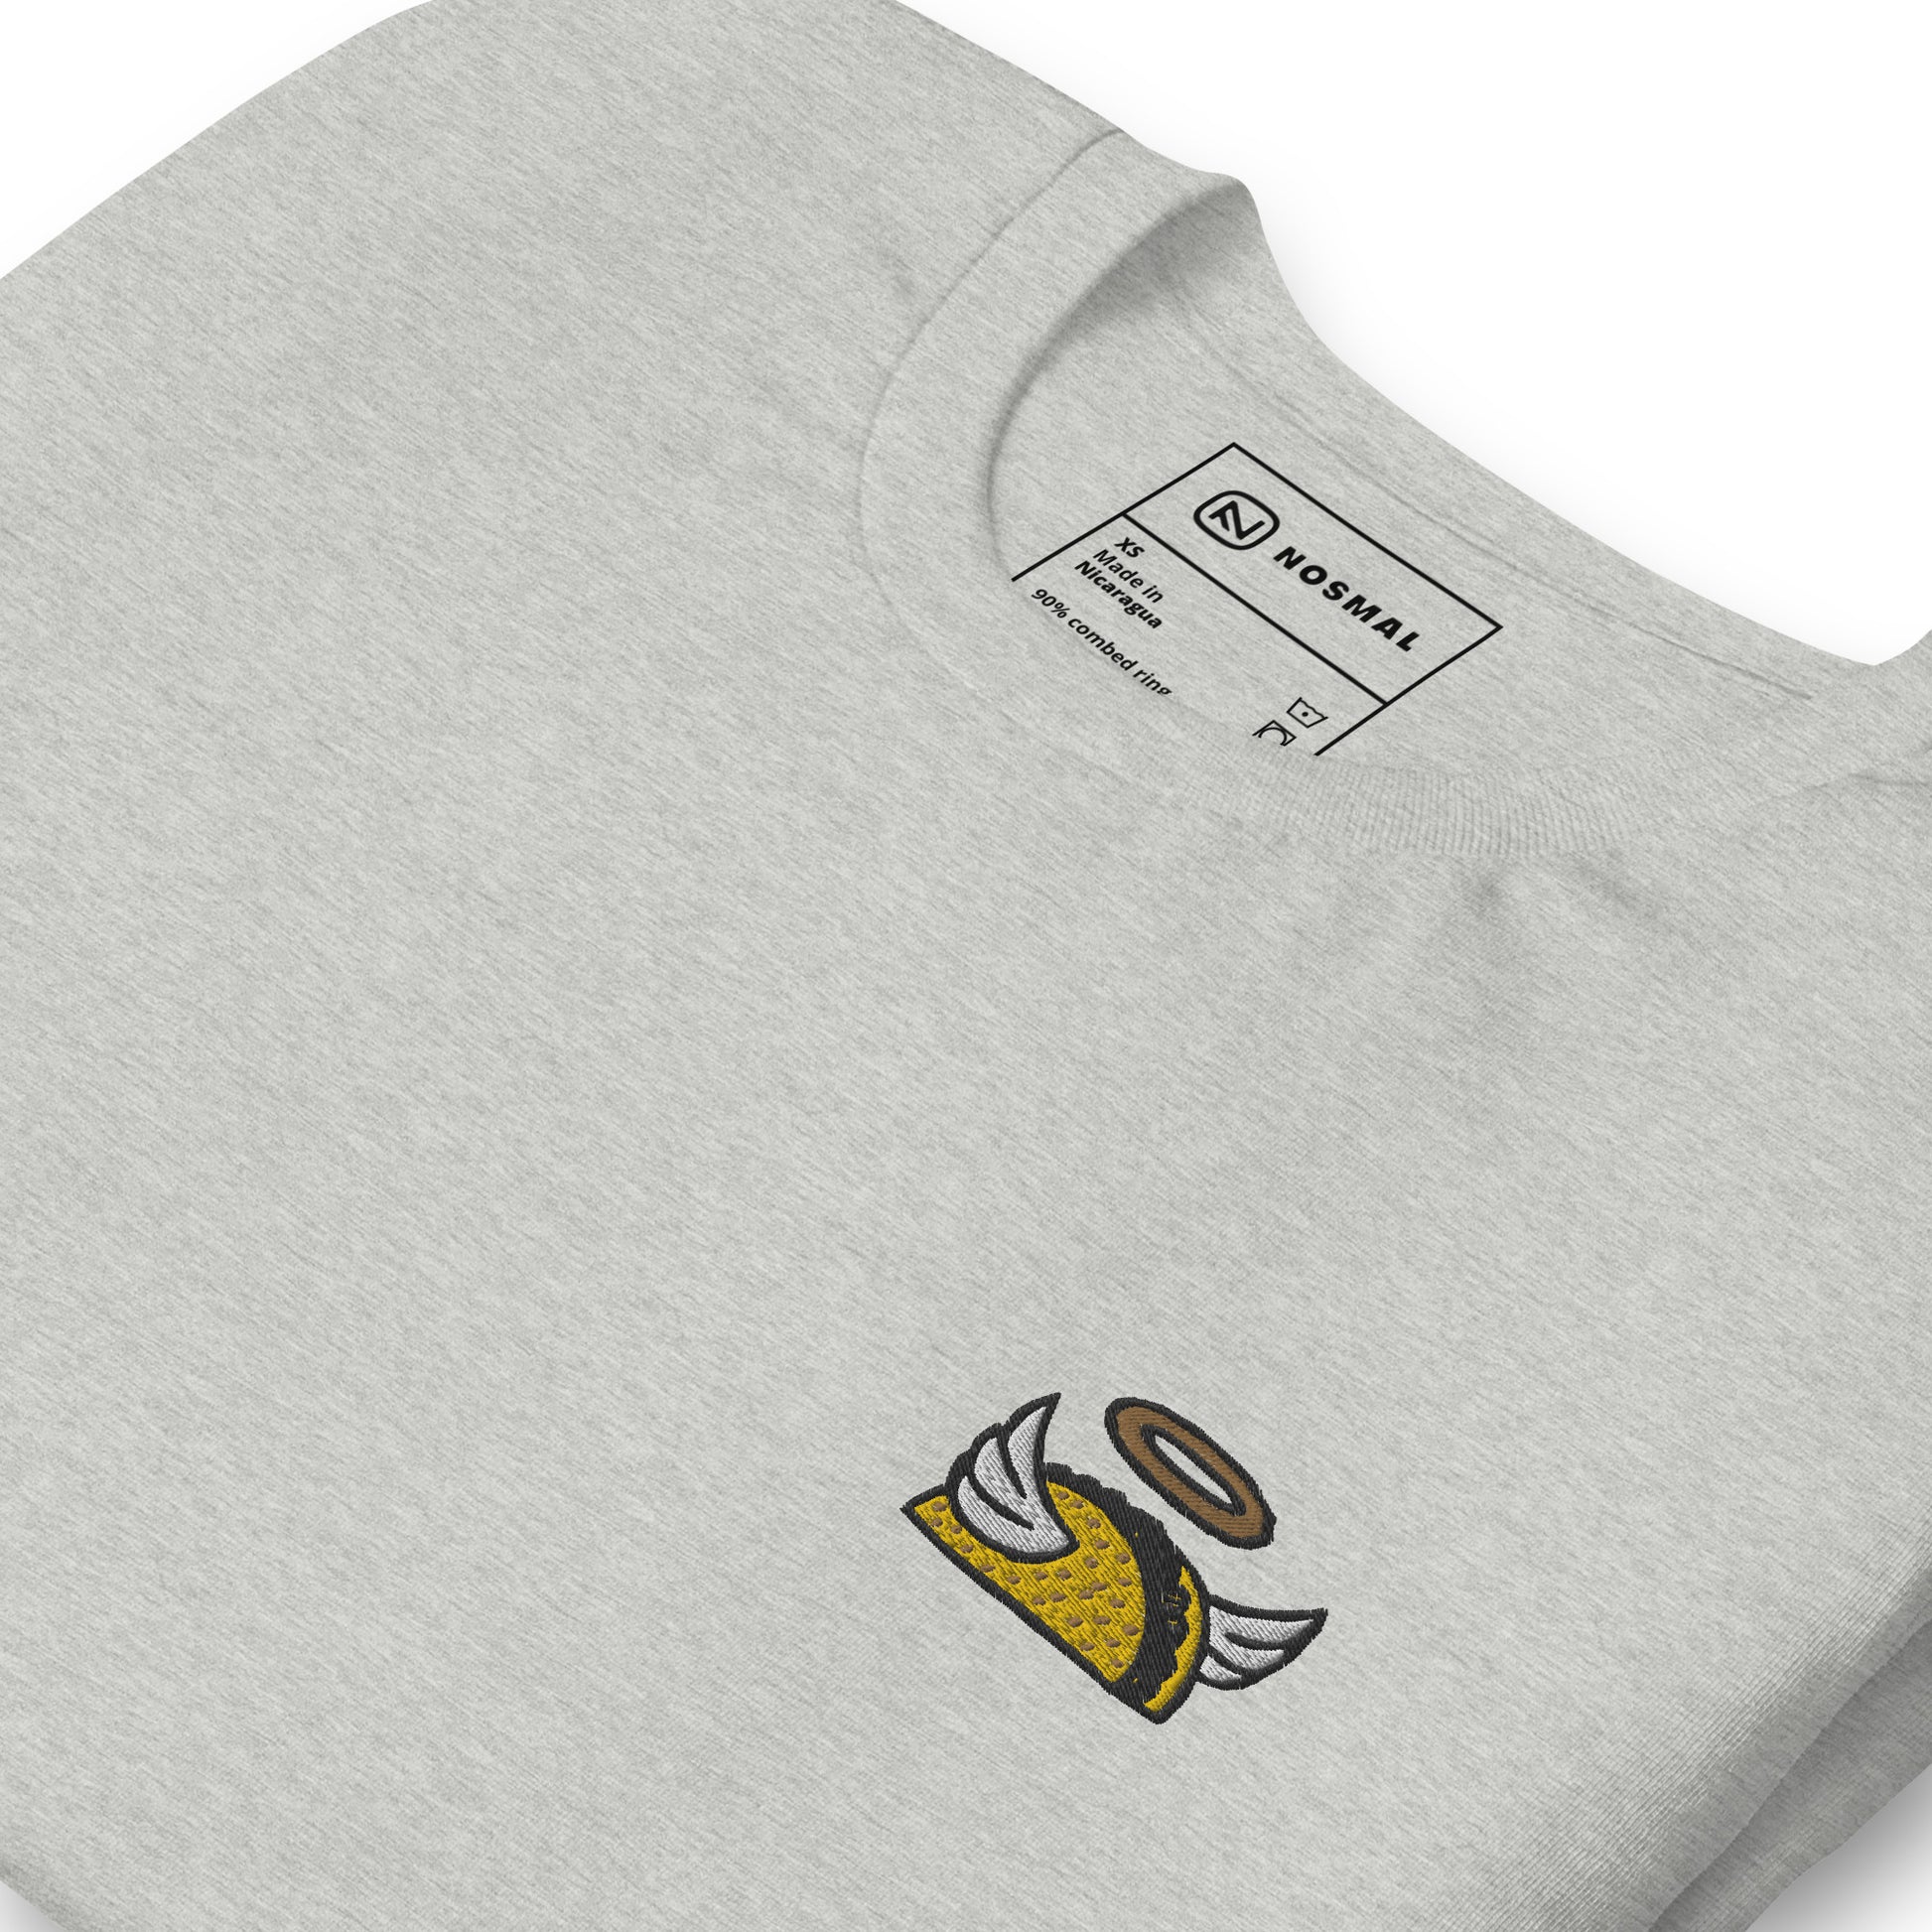 Angled close up holy taco club embroidered design on heather athletic grey unisex t-shirt.